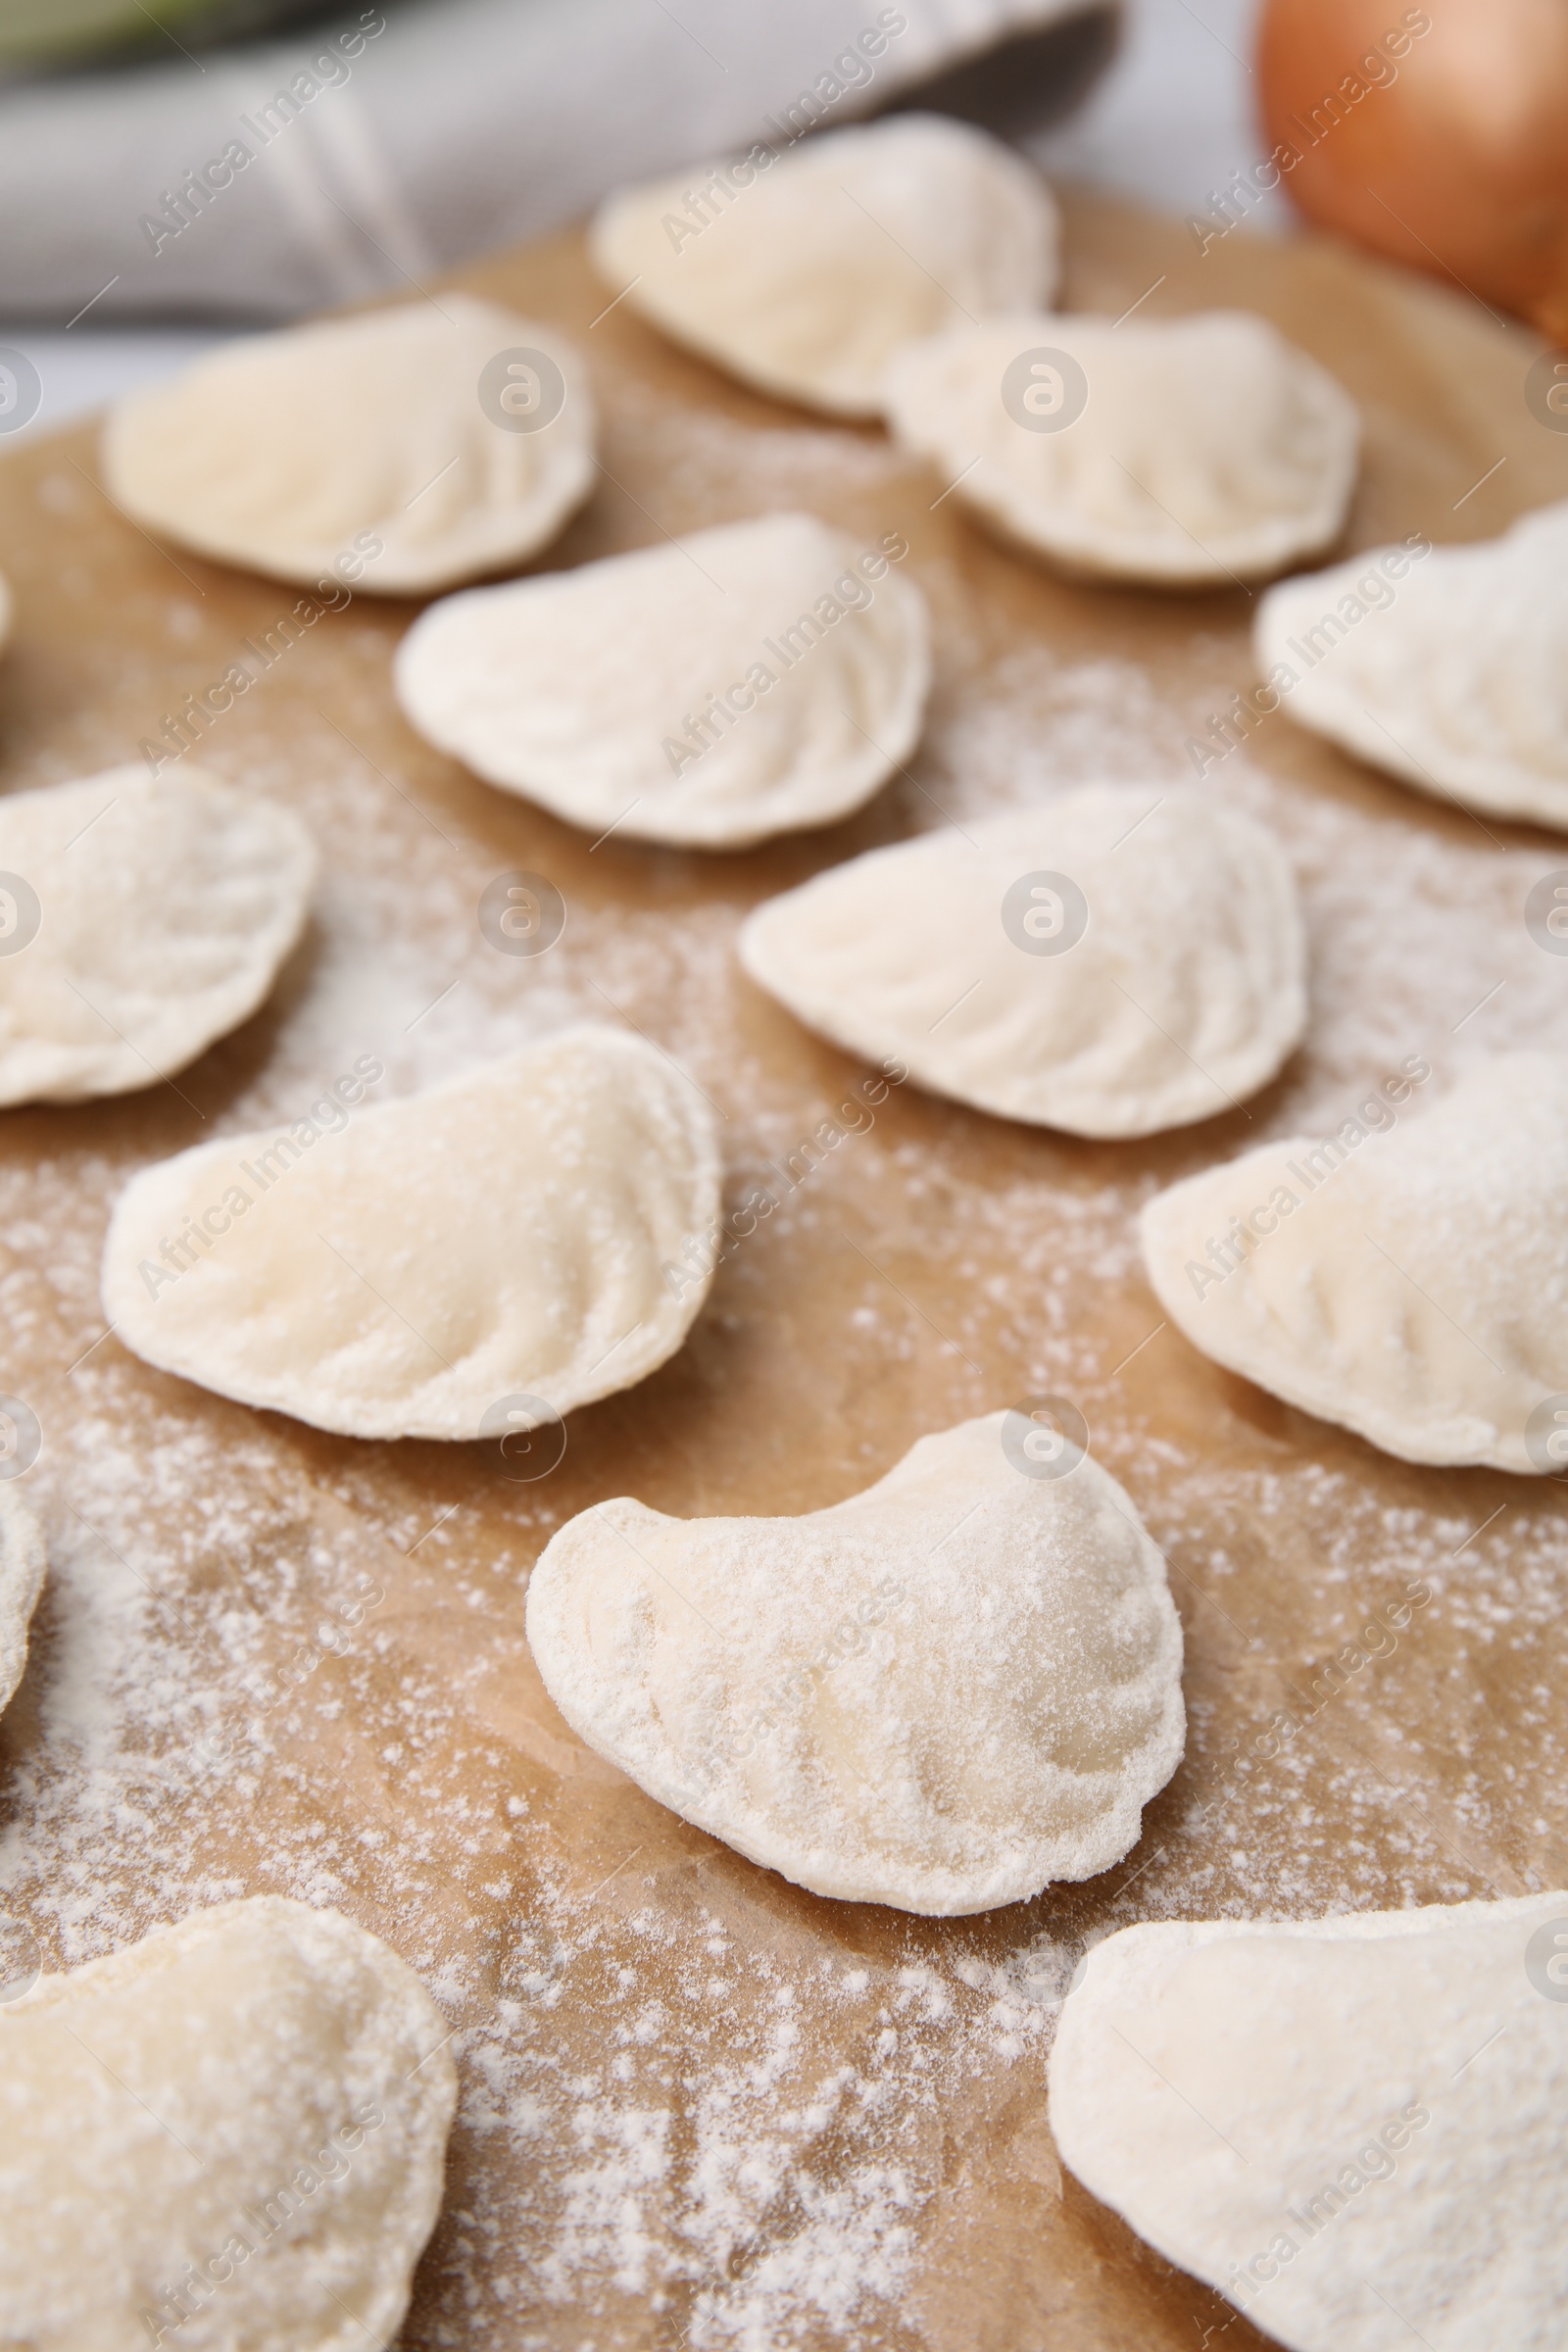 Photo of Raw dumplings (varenyky) with tasty filling and flour on parchment paper, closeup view